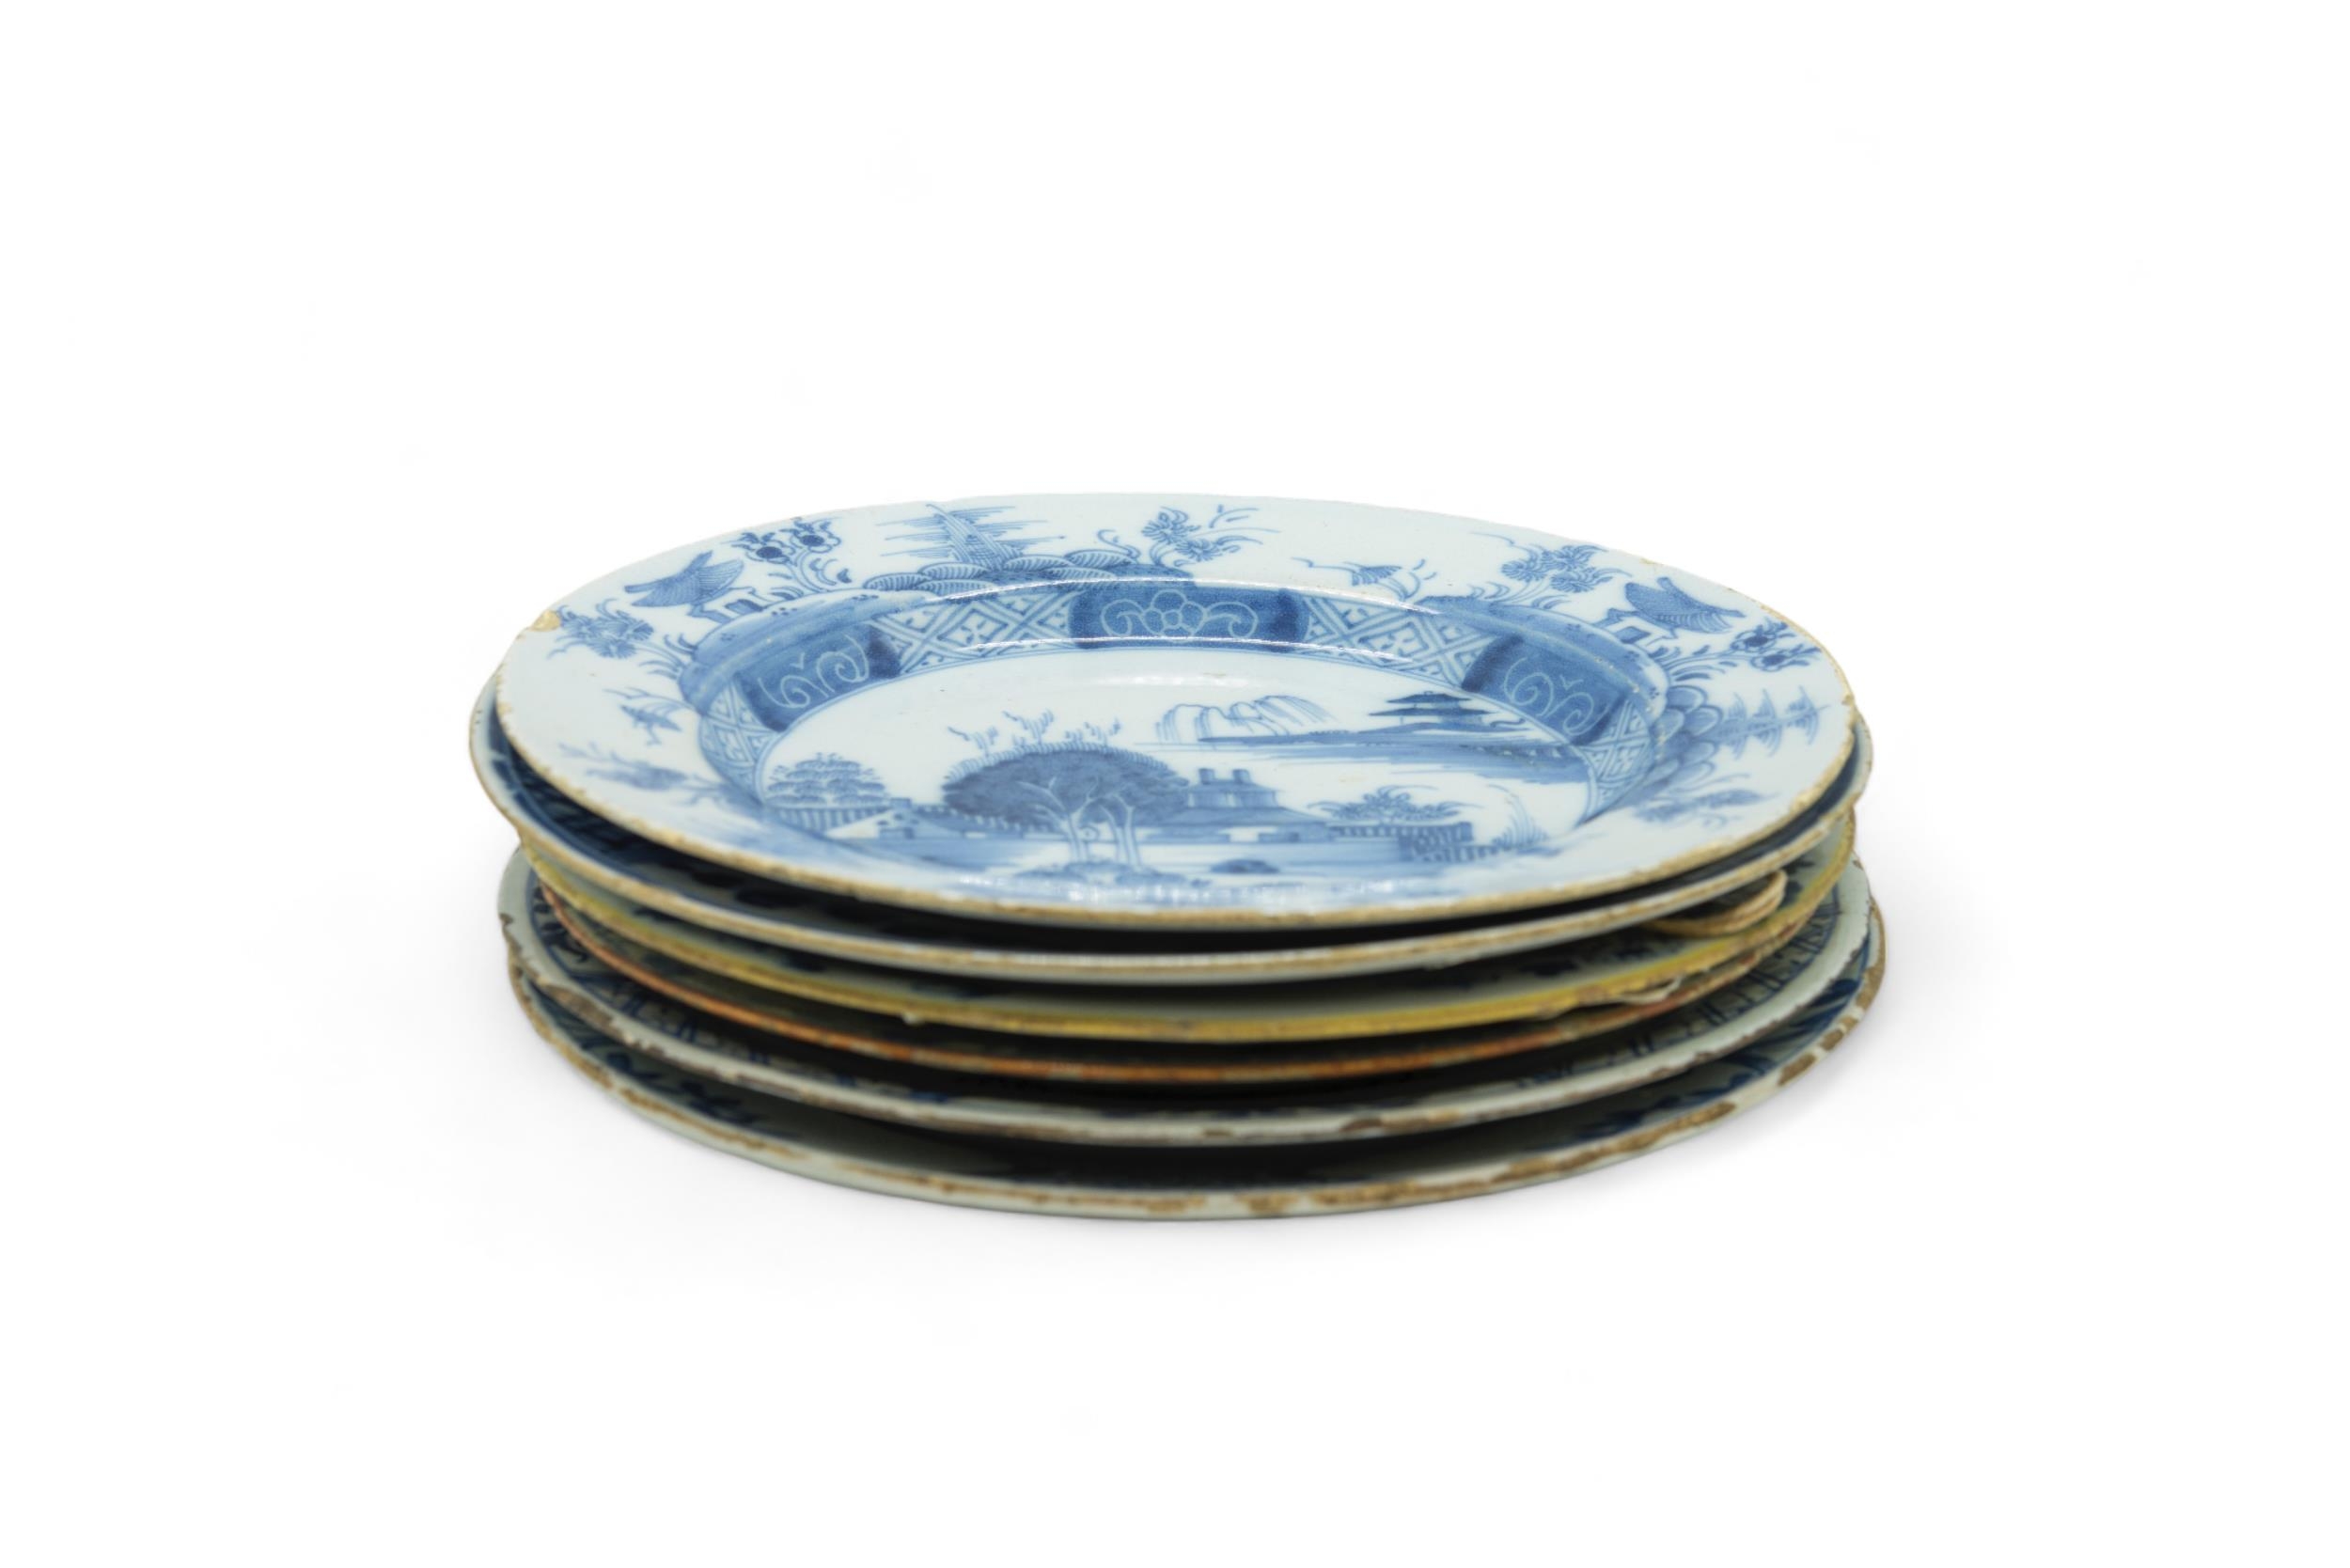 SIX DELFT PLATES 18th Century, one inscribed "T.M.LANE", 23cms wide - Image 6 of 7